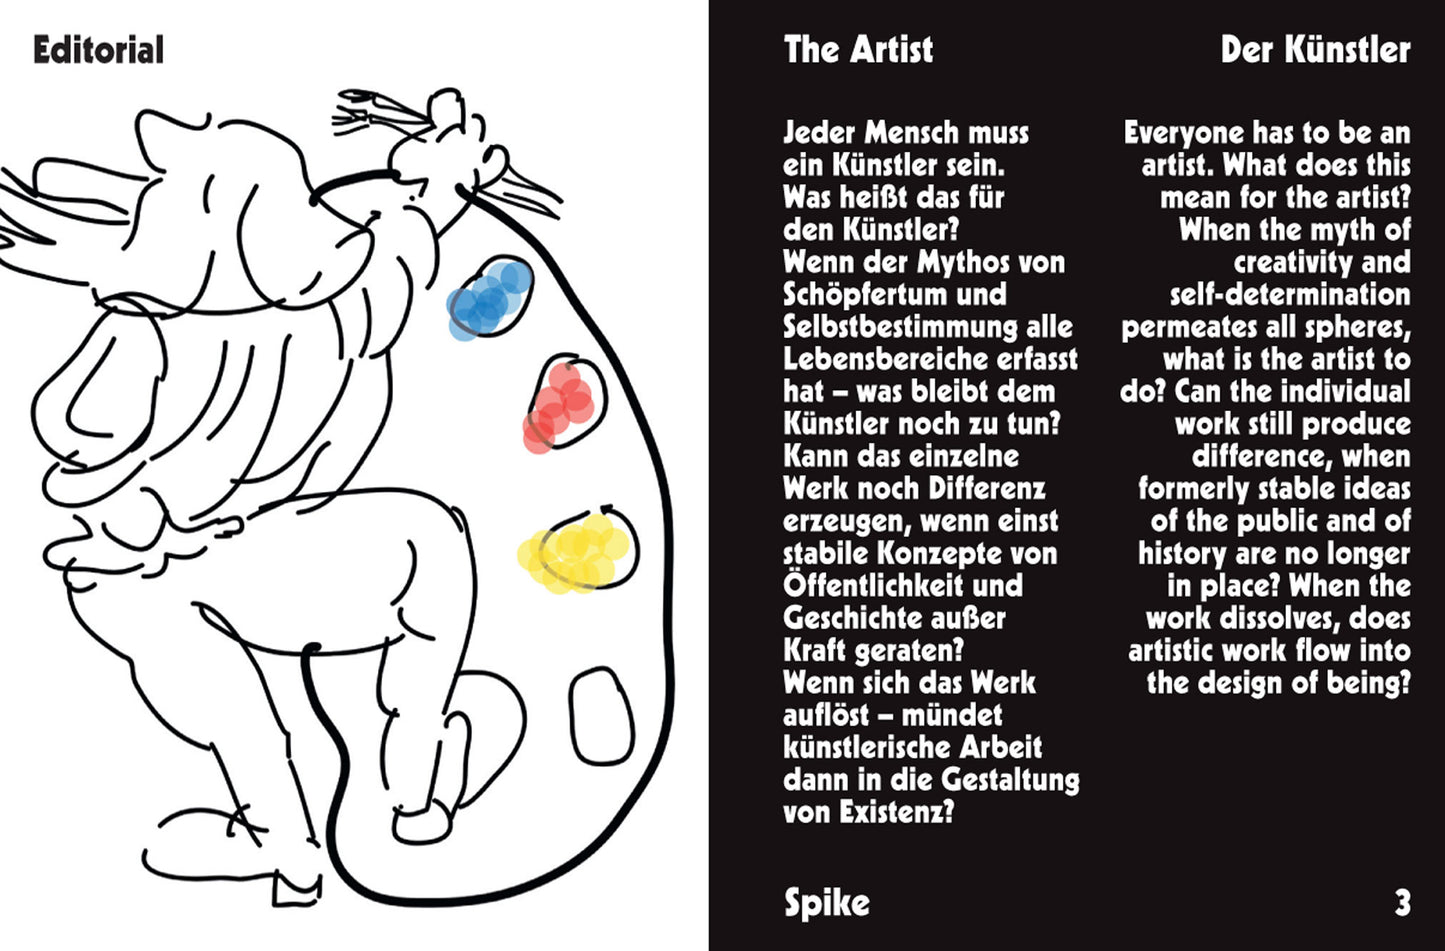 ISSUE 43 (SPRING 2015): The Artist